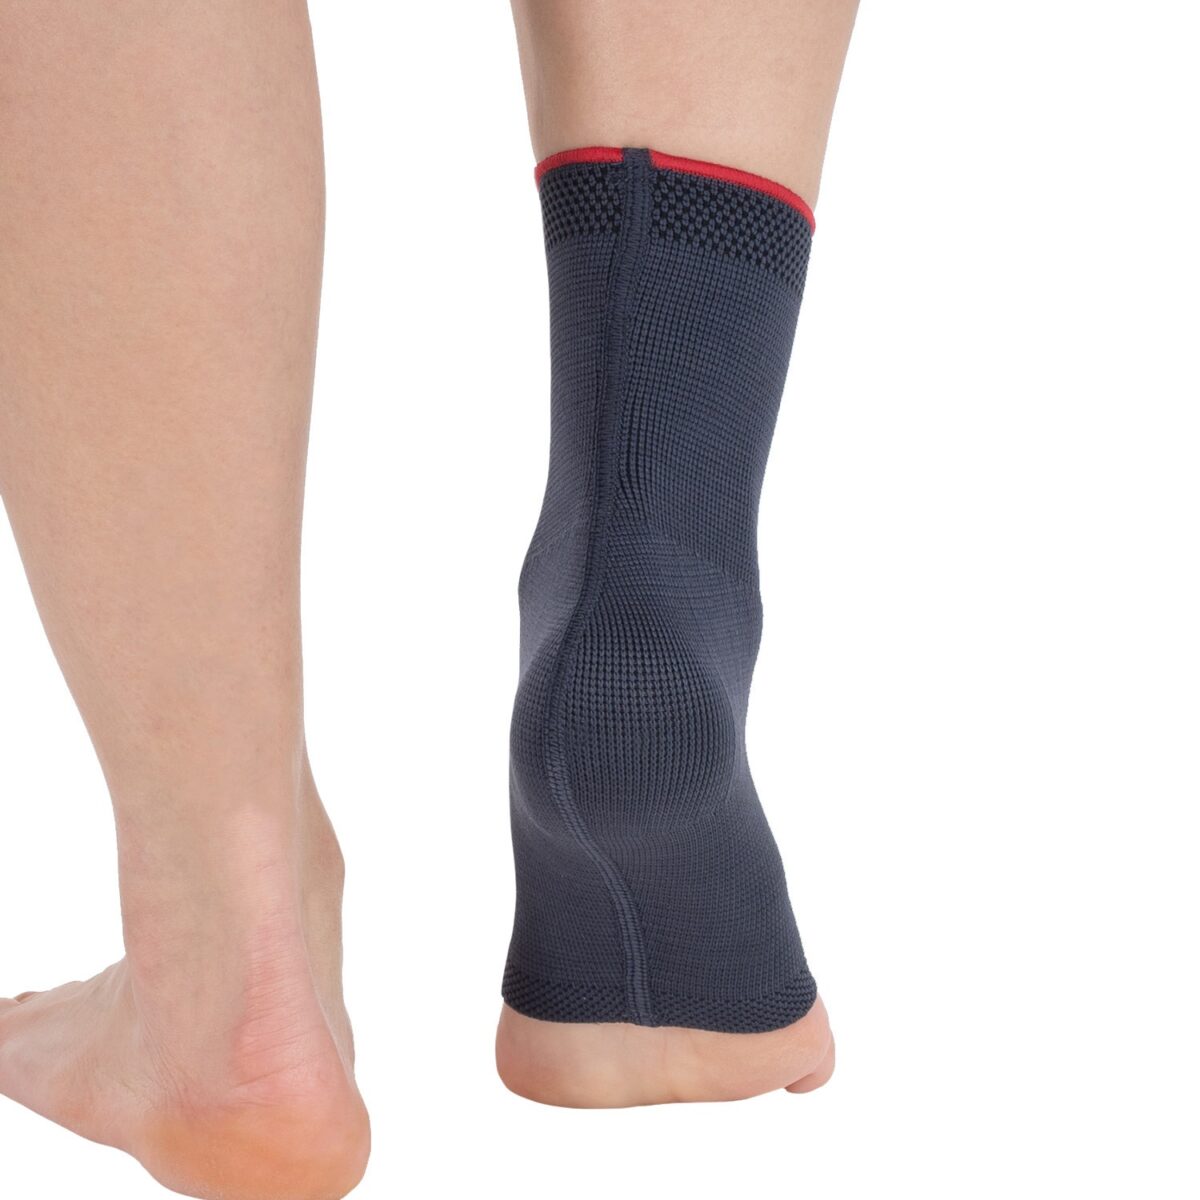 wingmed orthopedic equipments W602 woven ankle support 22 1 1